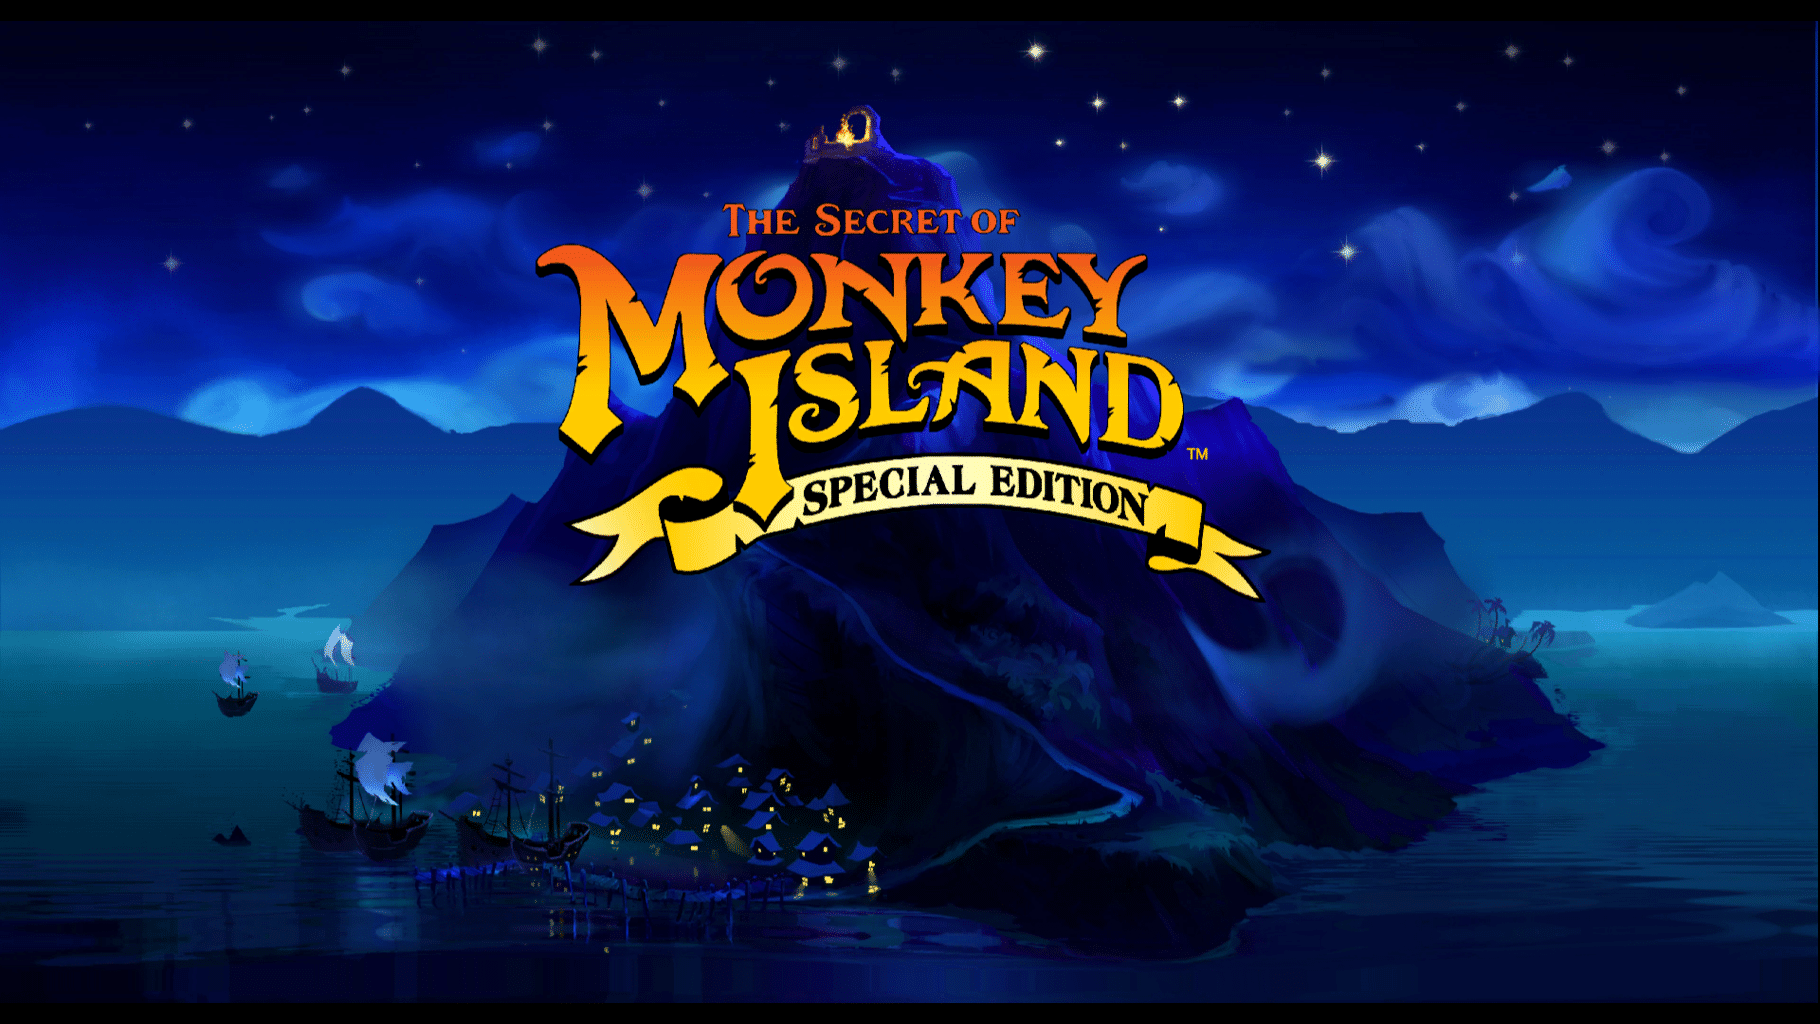 the secret of monkey island special edition collection